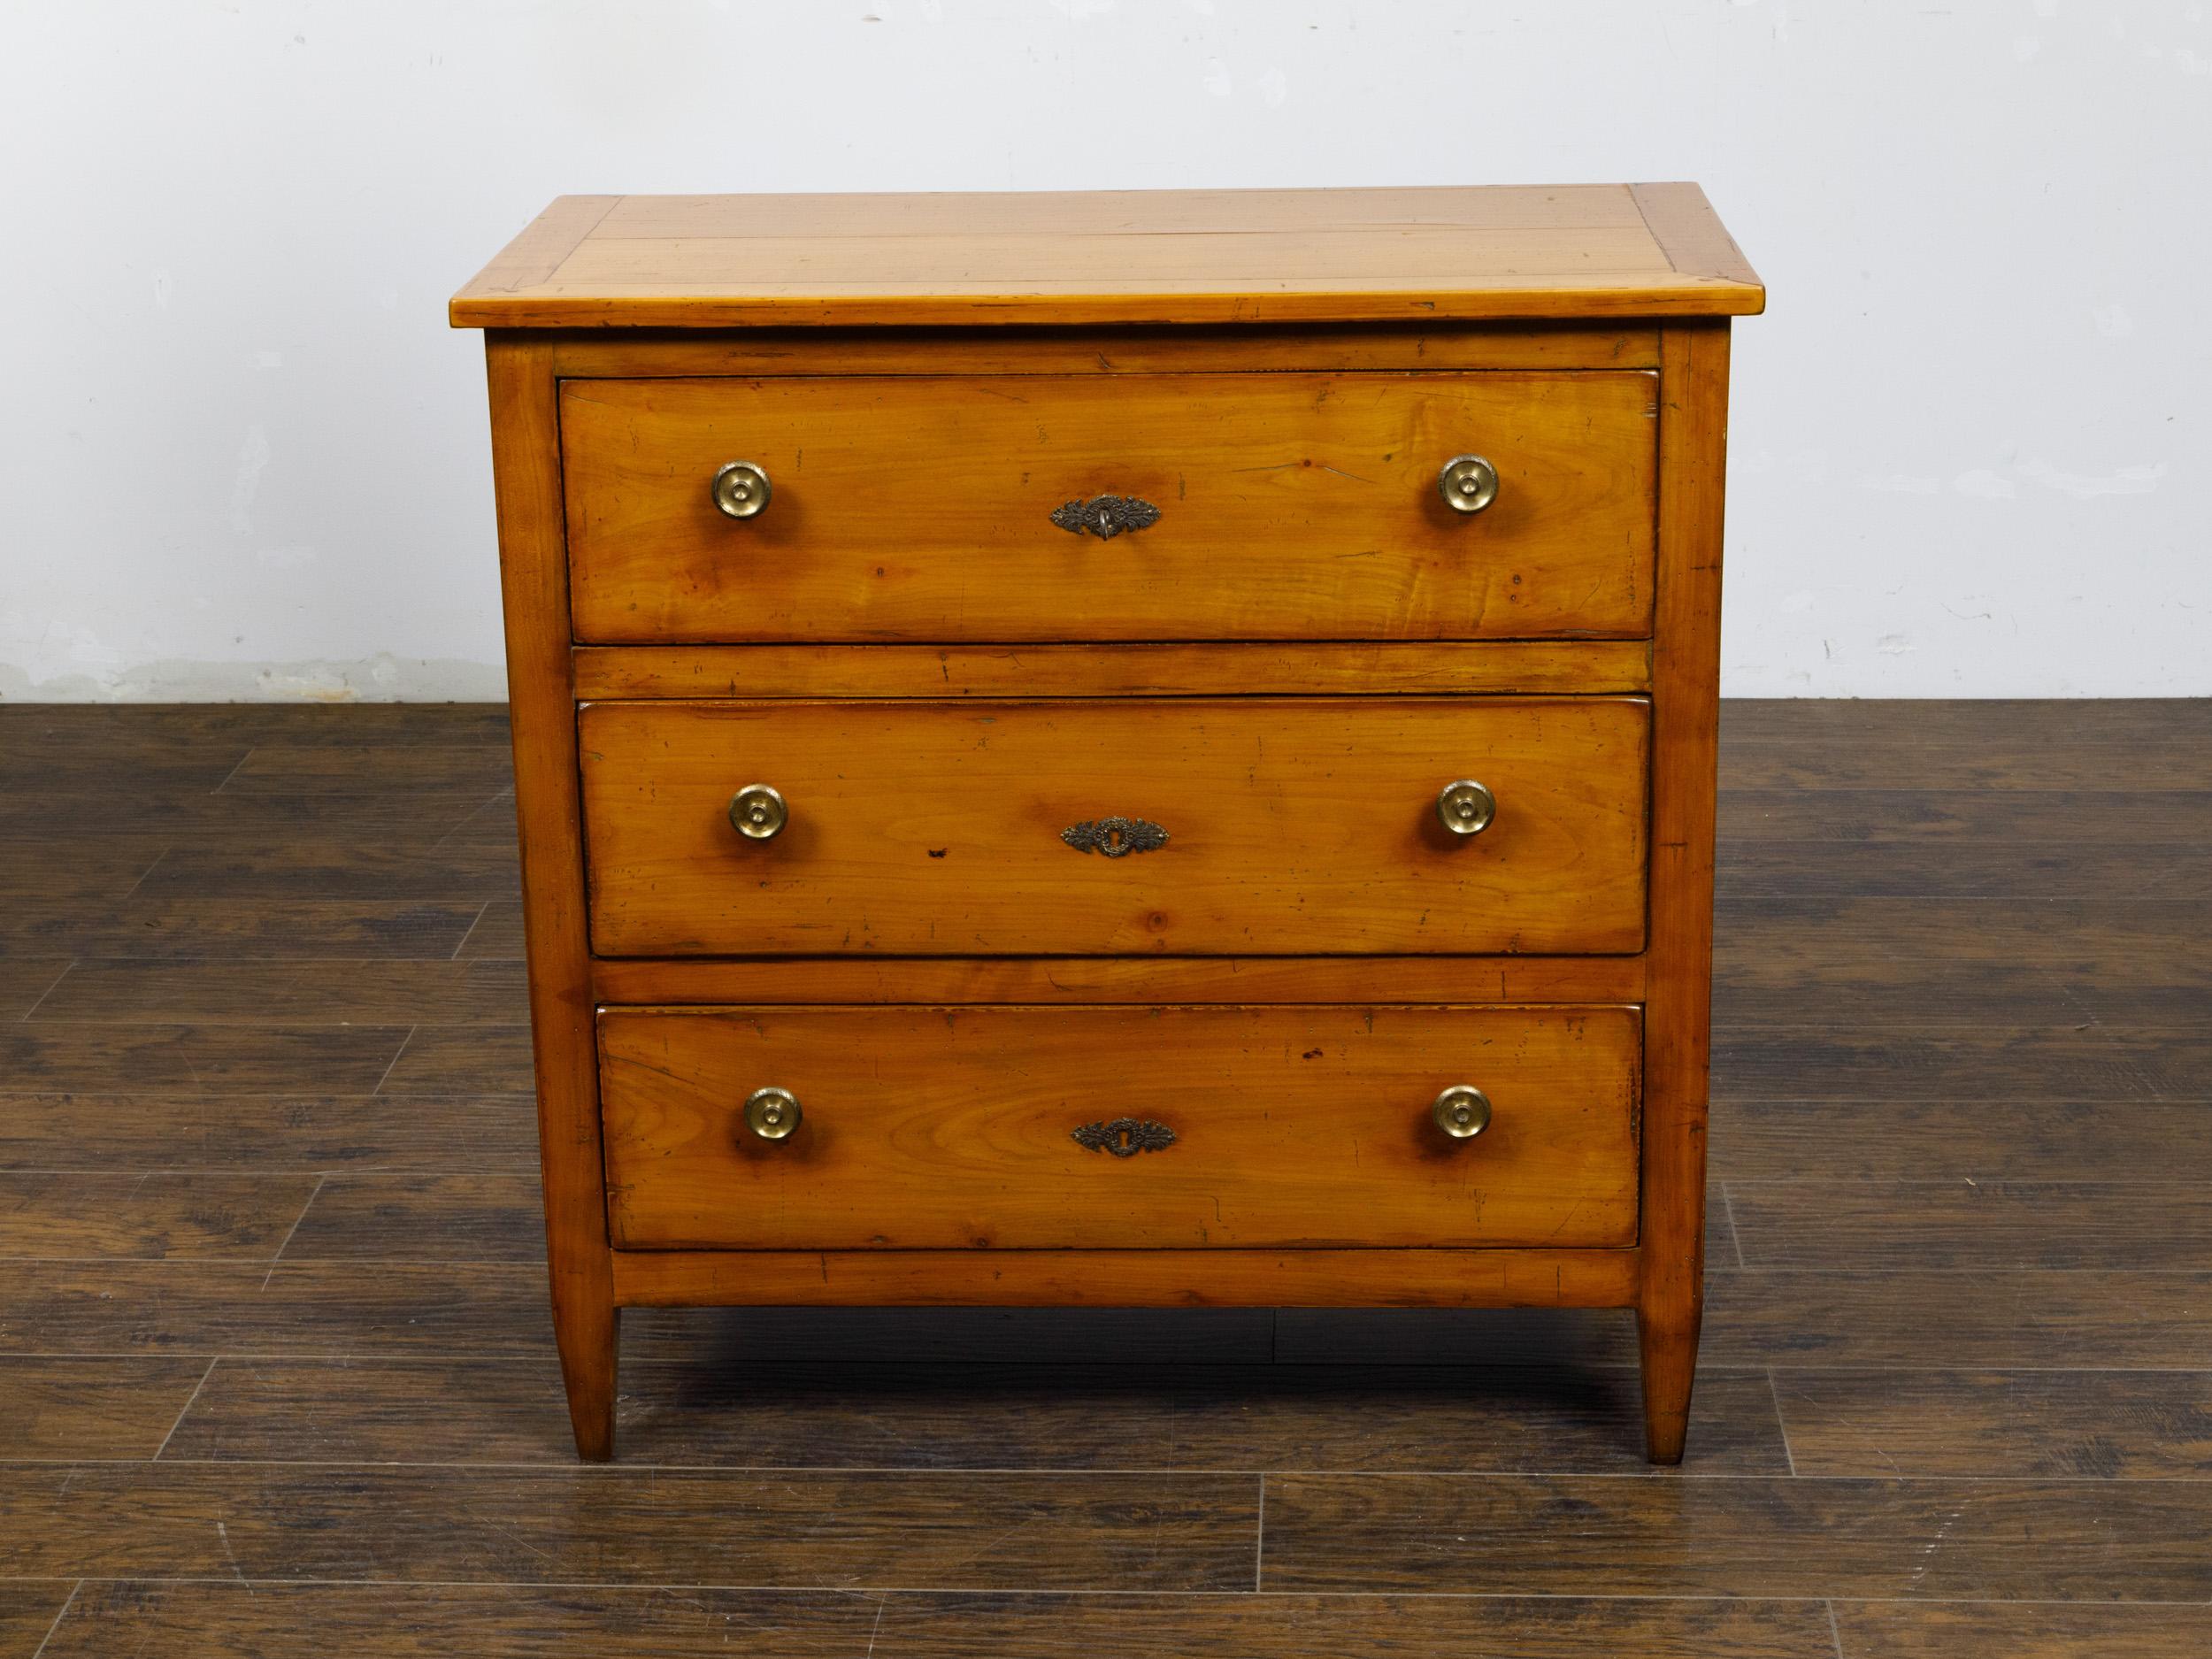 A French Empire style walnut chest from the 19th century with drop front desk and two additional drawers. This elegant French Empire style walnut chest from the 19th century exudes classical refinement with its multi-functional design. It features a